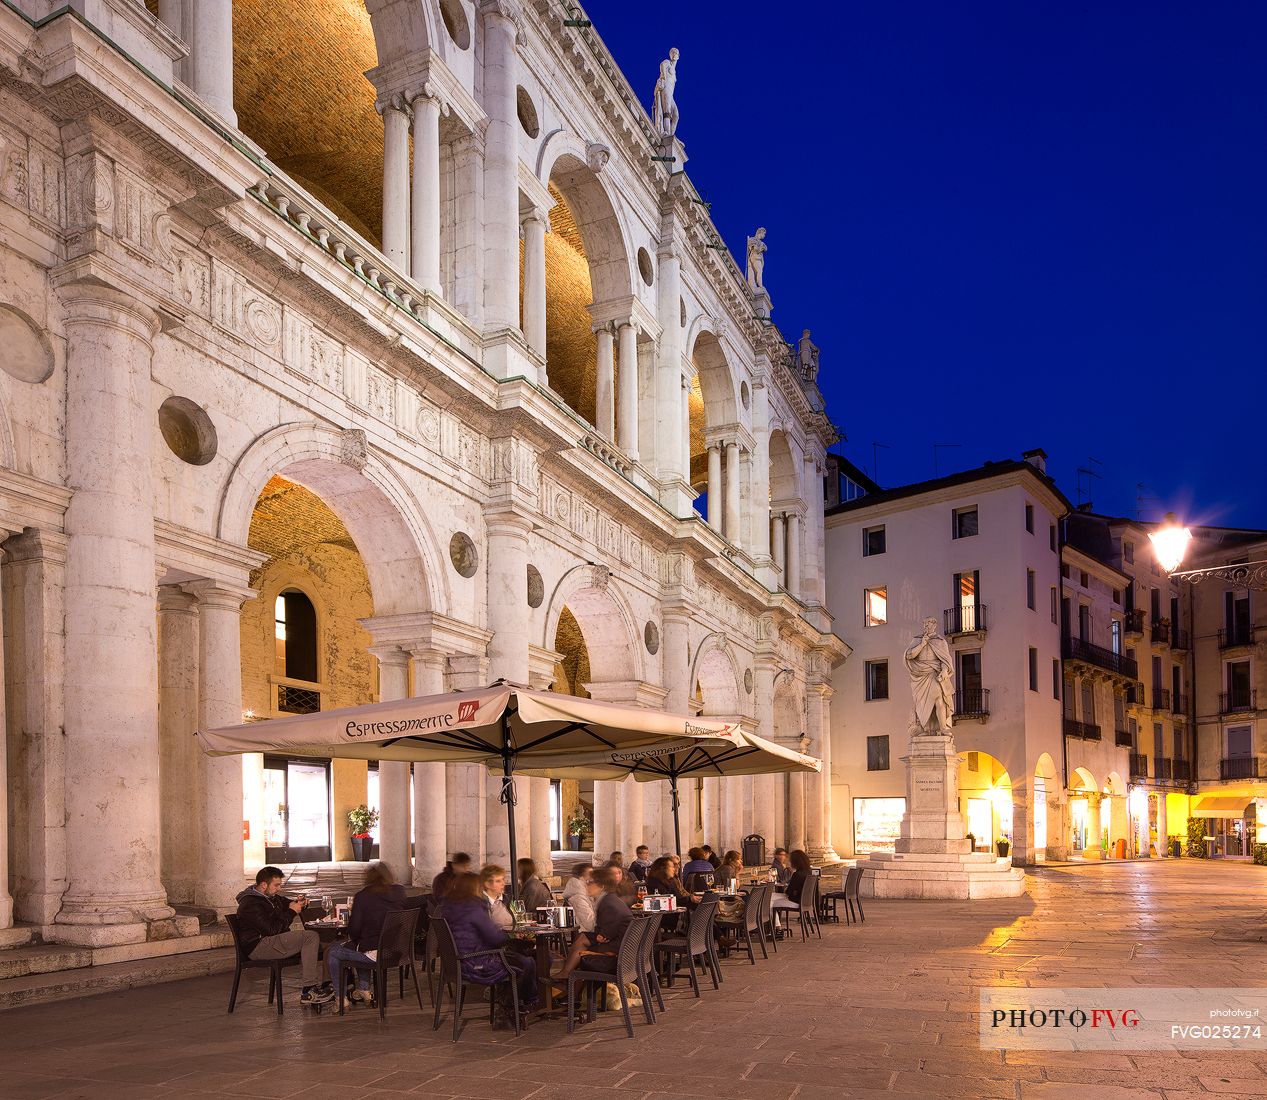 The Piazza dei Signori in the historic center of Vicenza with the facade of the Basilica Palladiana during a spring evening, Vicenza, Italy